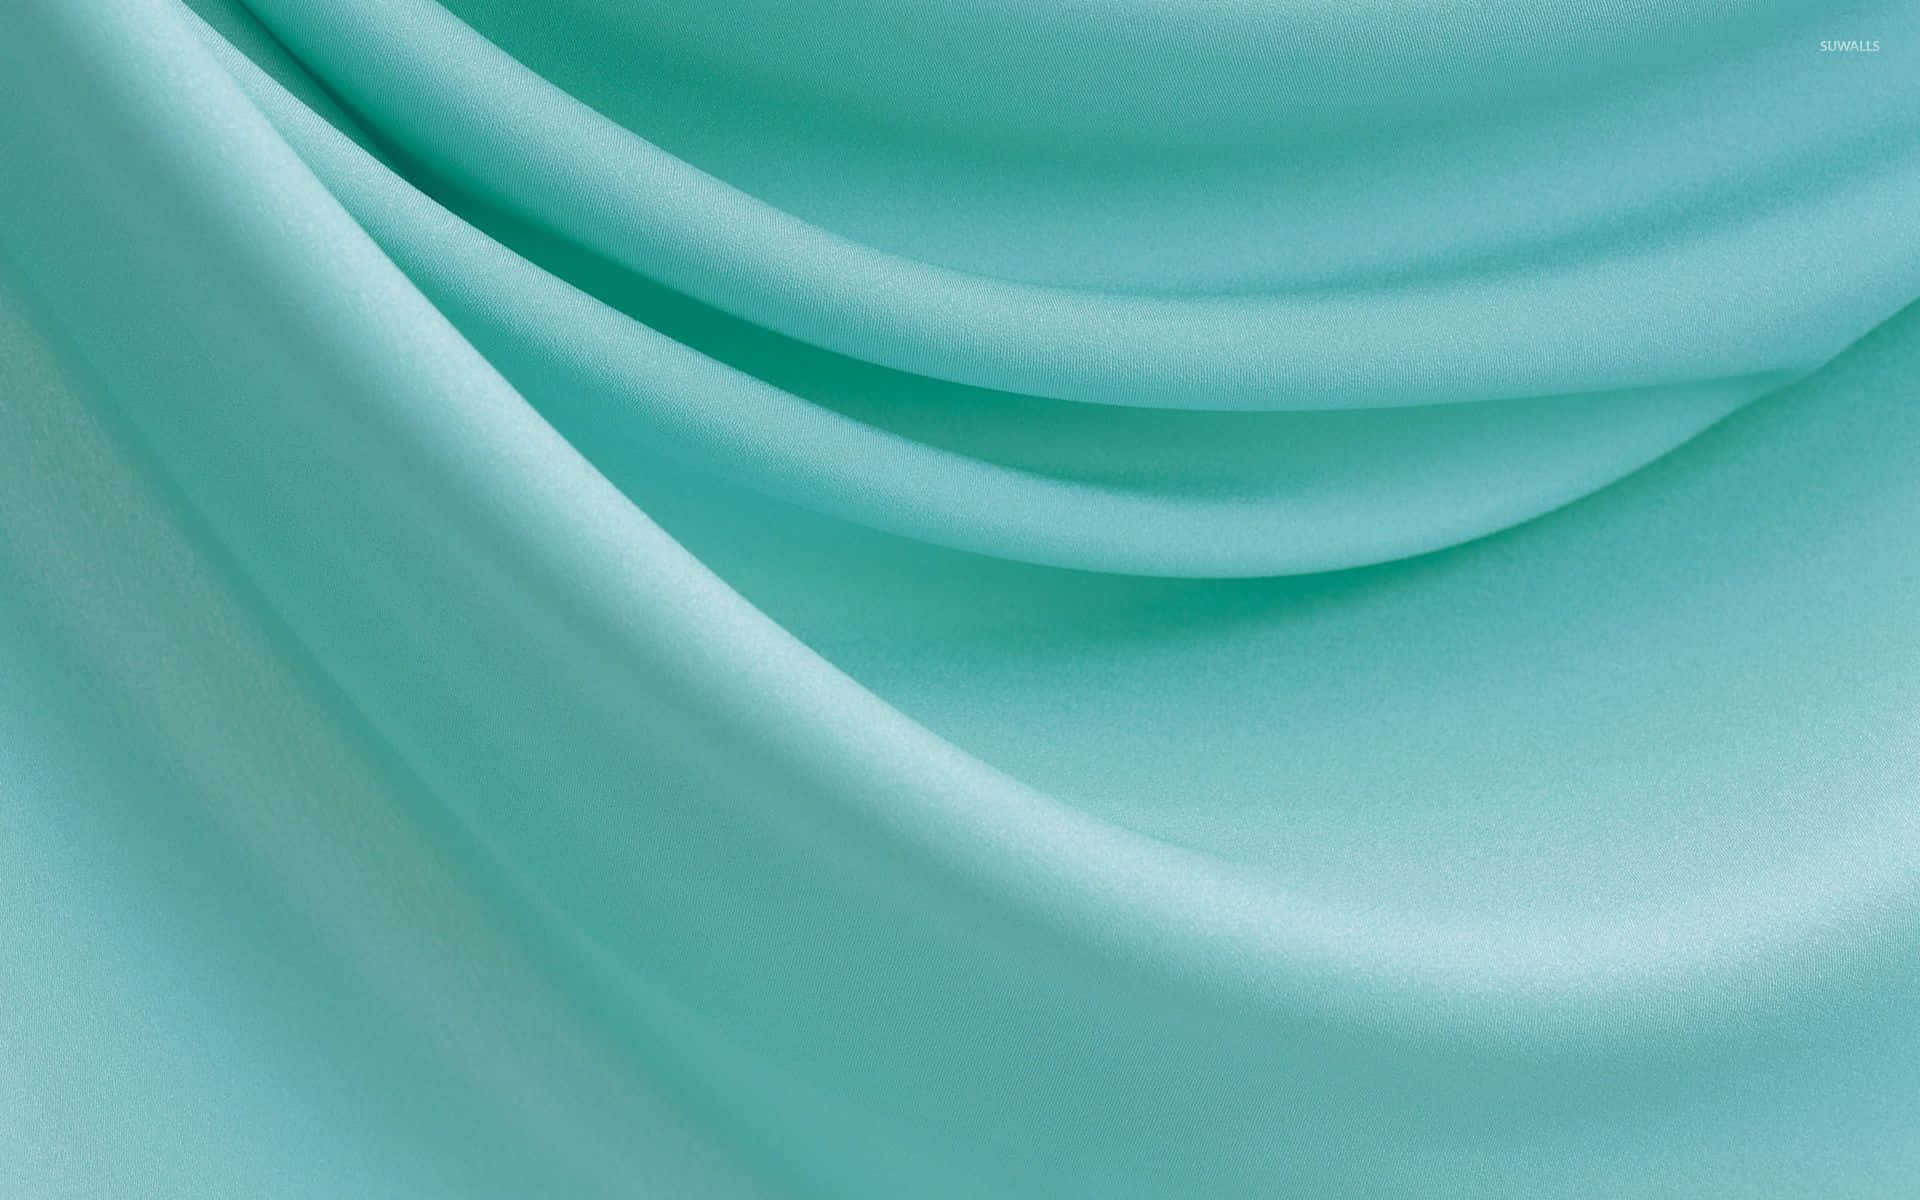 The stunning colour of turquoise blue inspires the soul Wallpaper